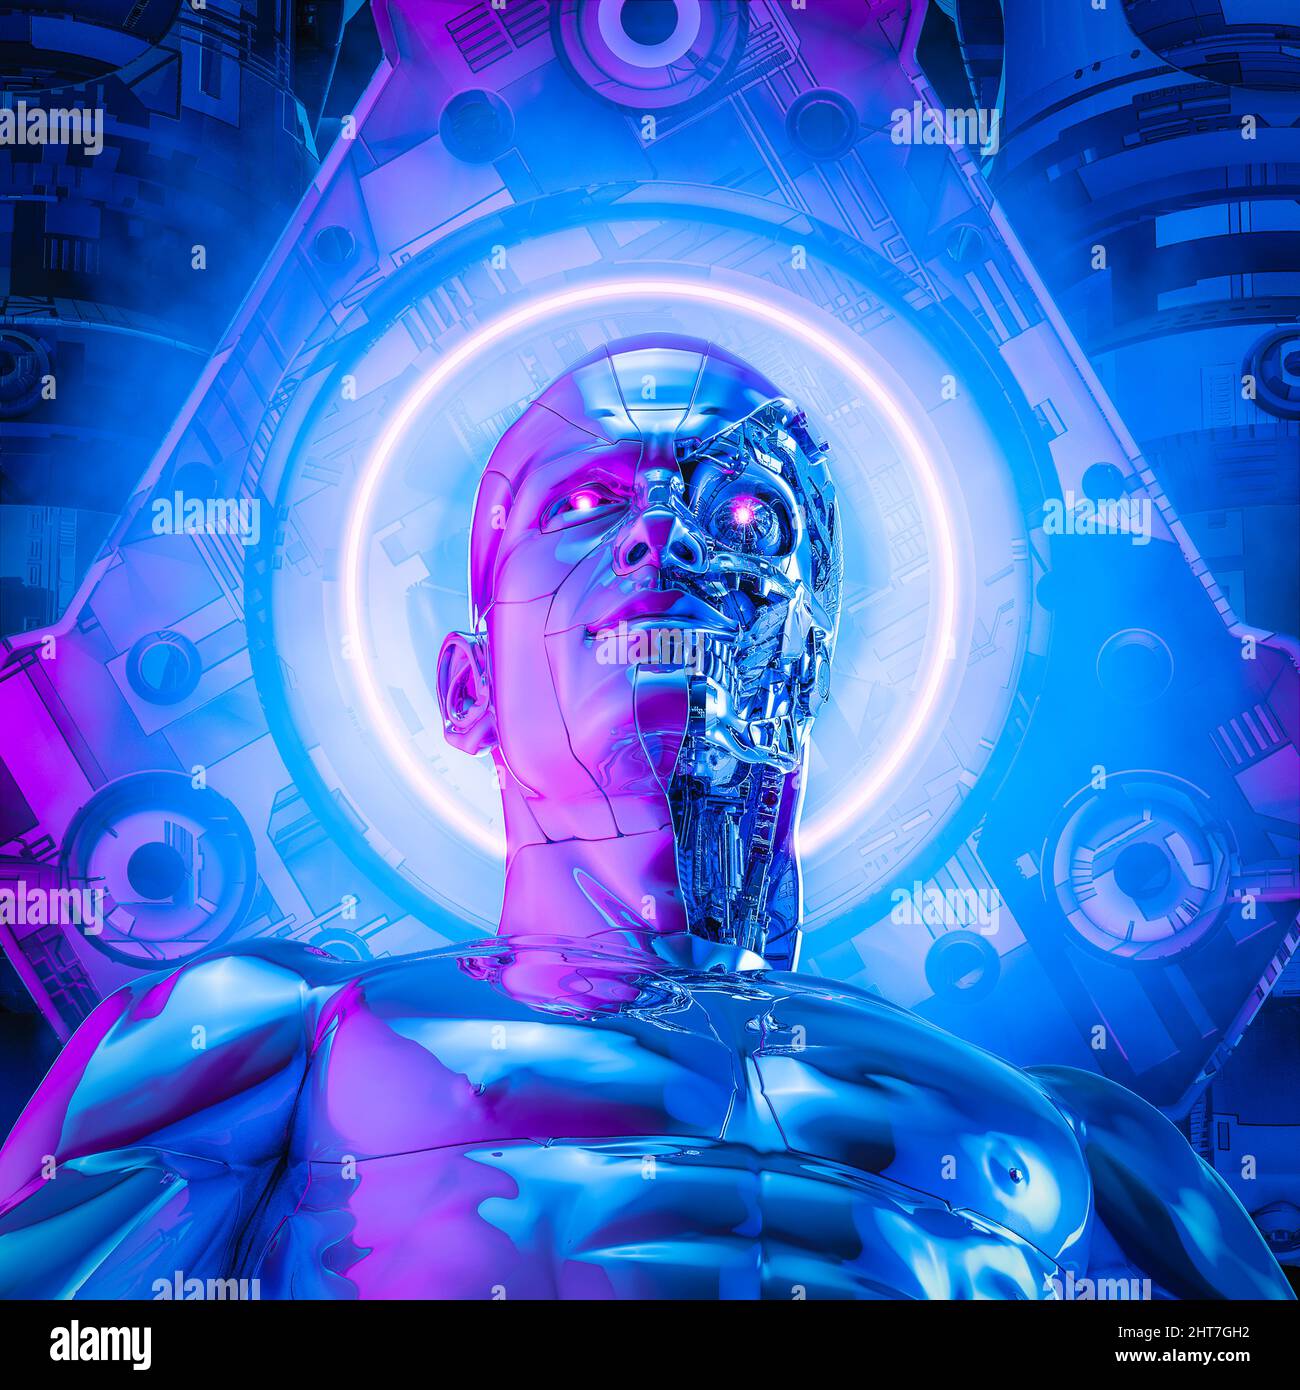 Power core cyborg - 3D illustration of science fiction male humanoid robot with glowing eyes with futuristic neon halo behind head Stock Photo